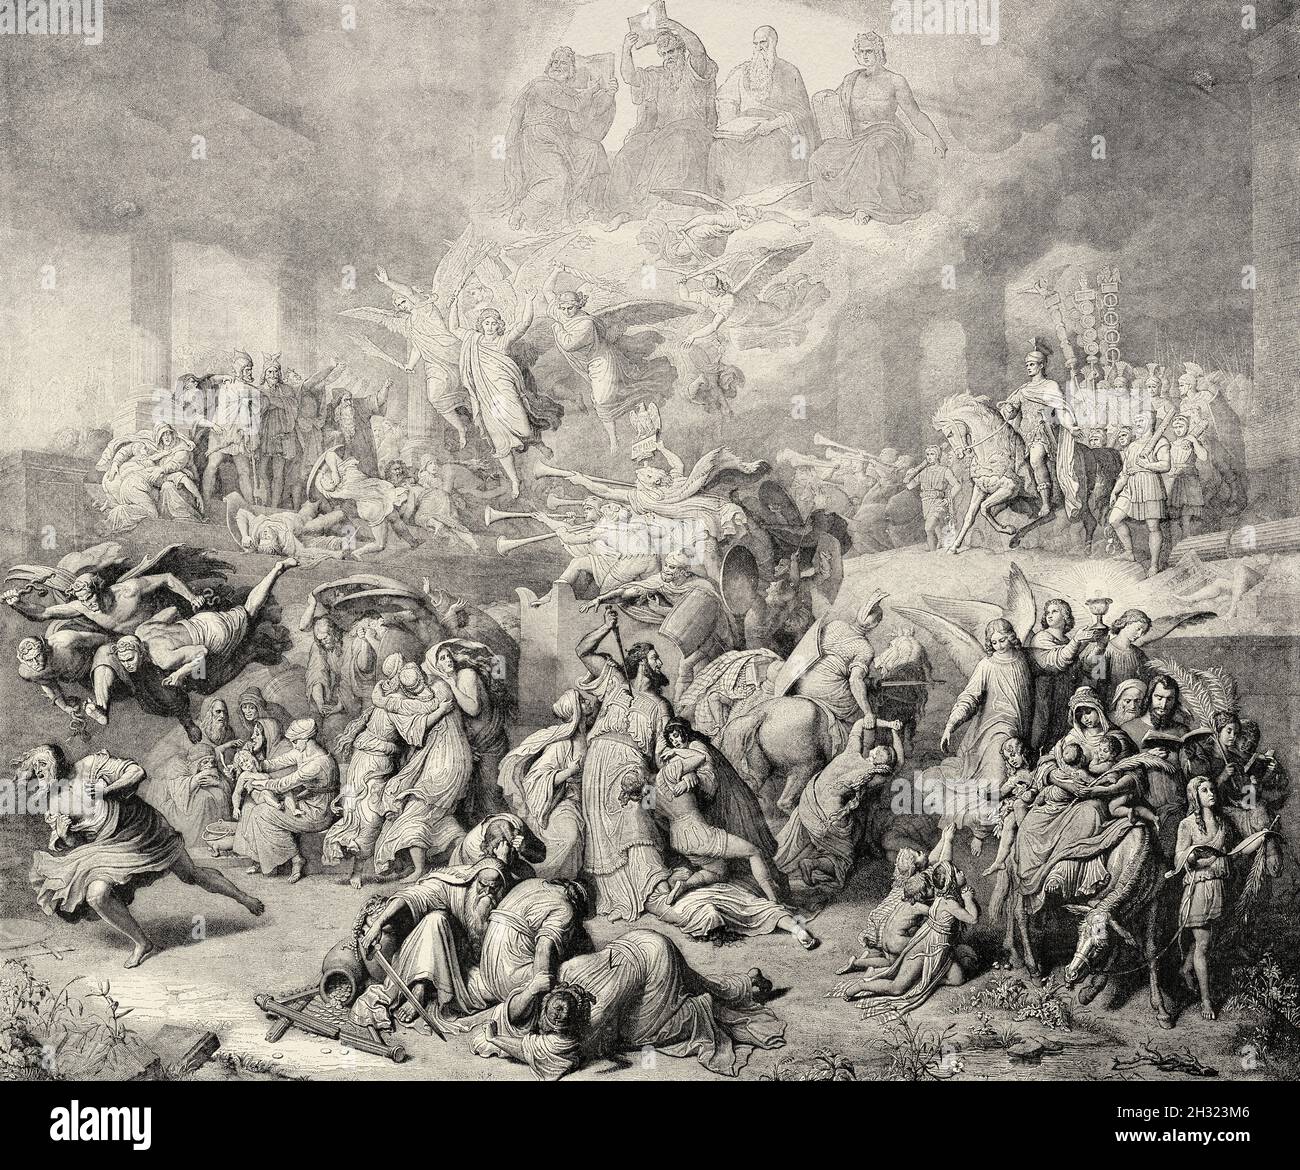 The destruction of Jerusalem. Book Kings, Old Testament, Catholic Bible , painting by Wilhelm von Kaulbach (1805-1874) was a German painter. Old 19th century engraved illustration from La Ilustración Artística 1882 Stock Photo